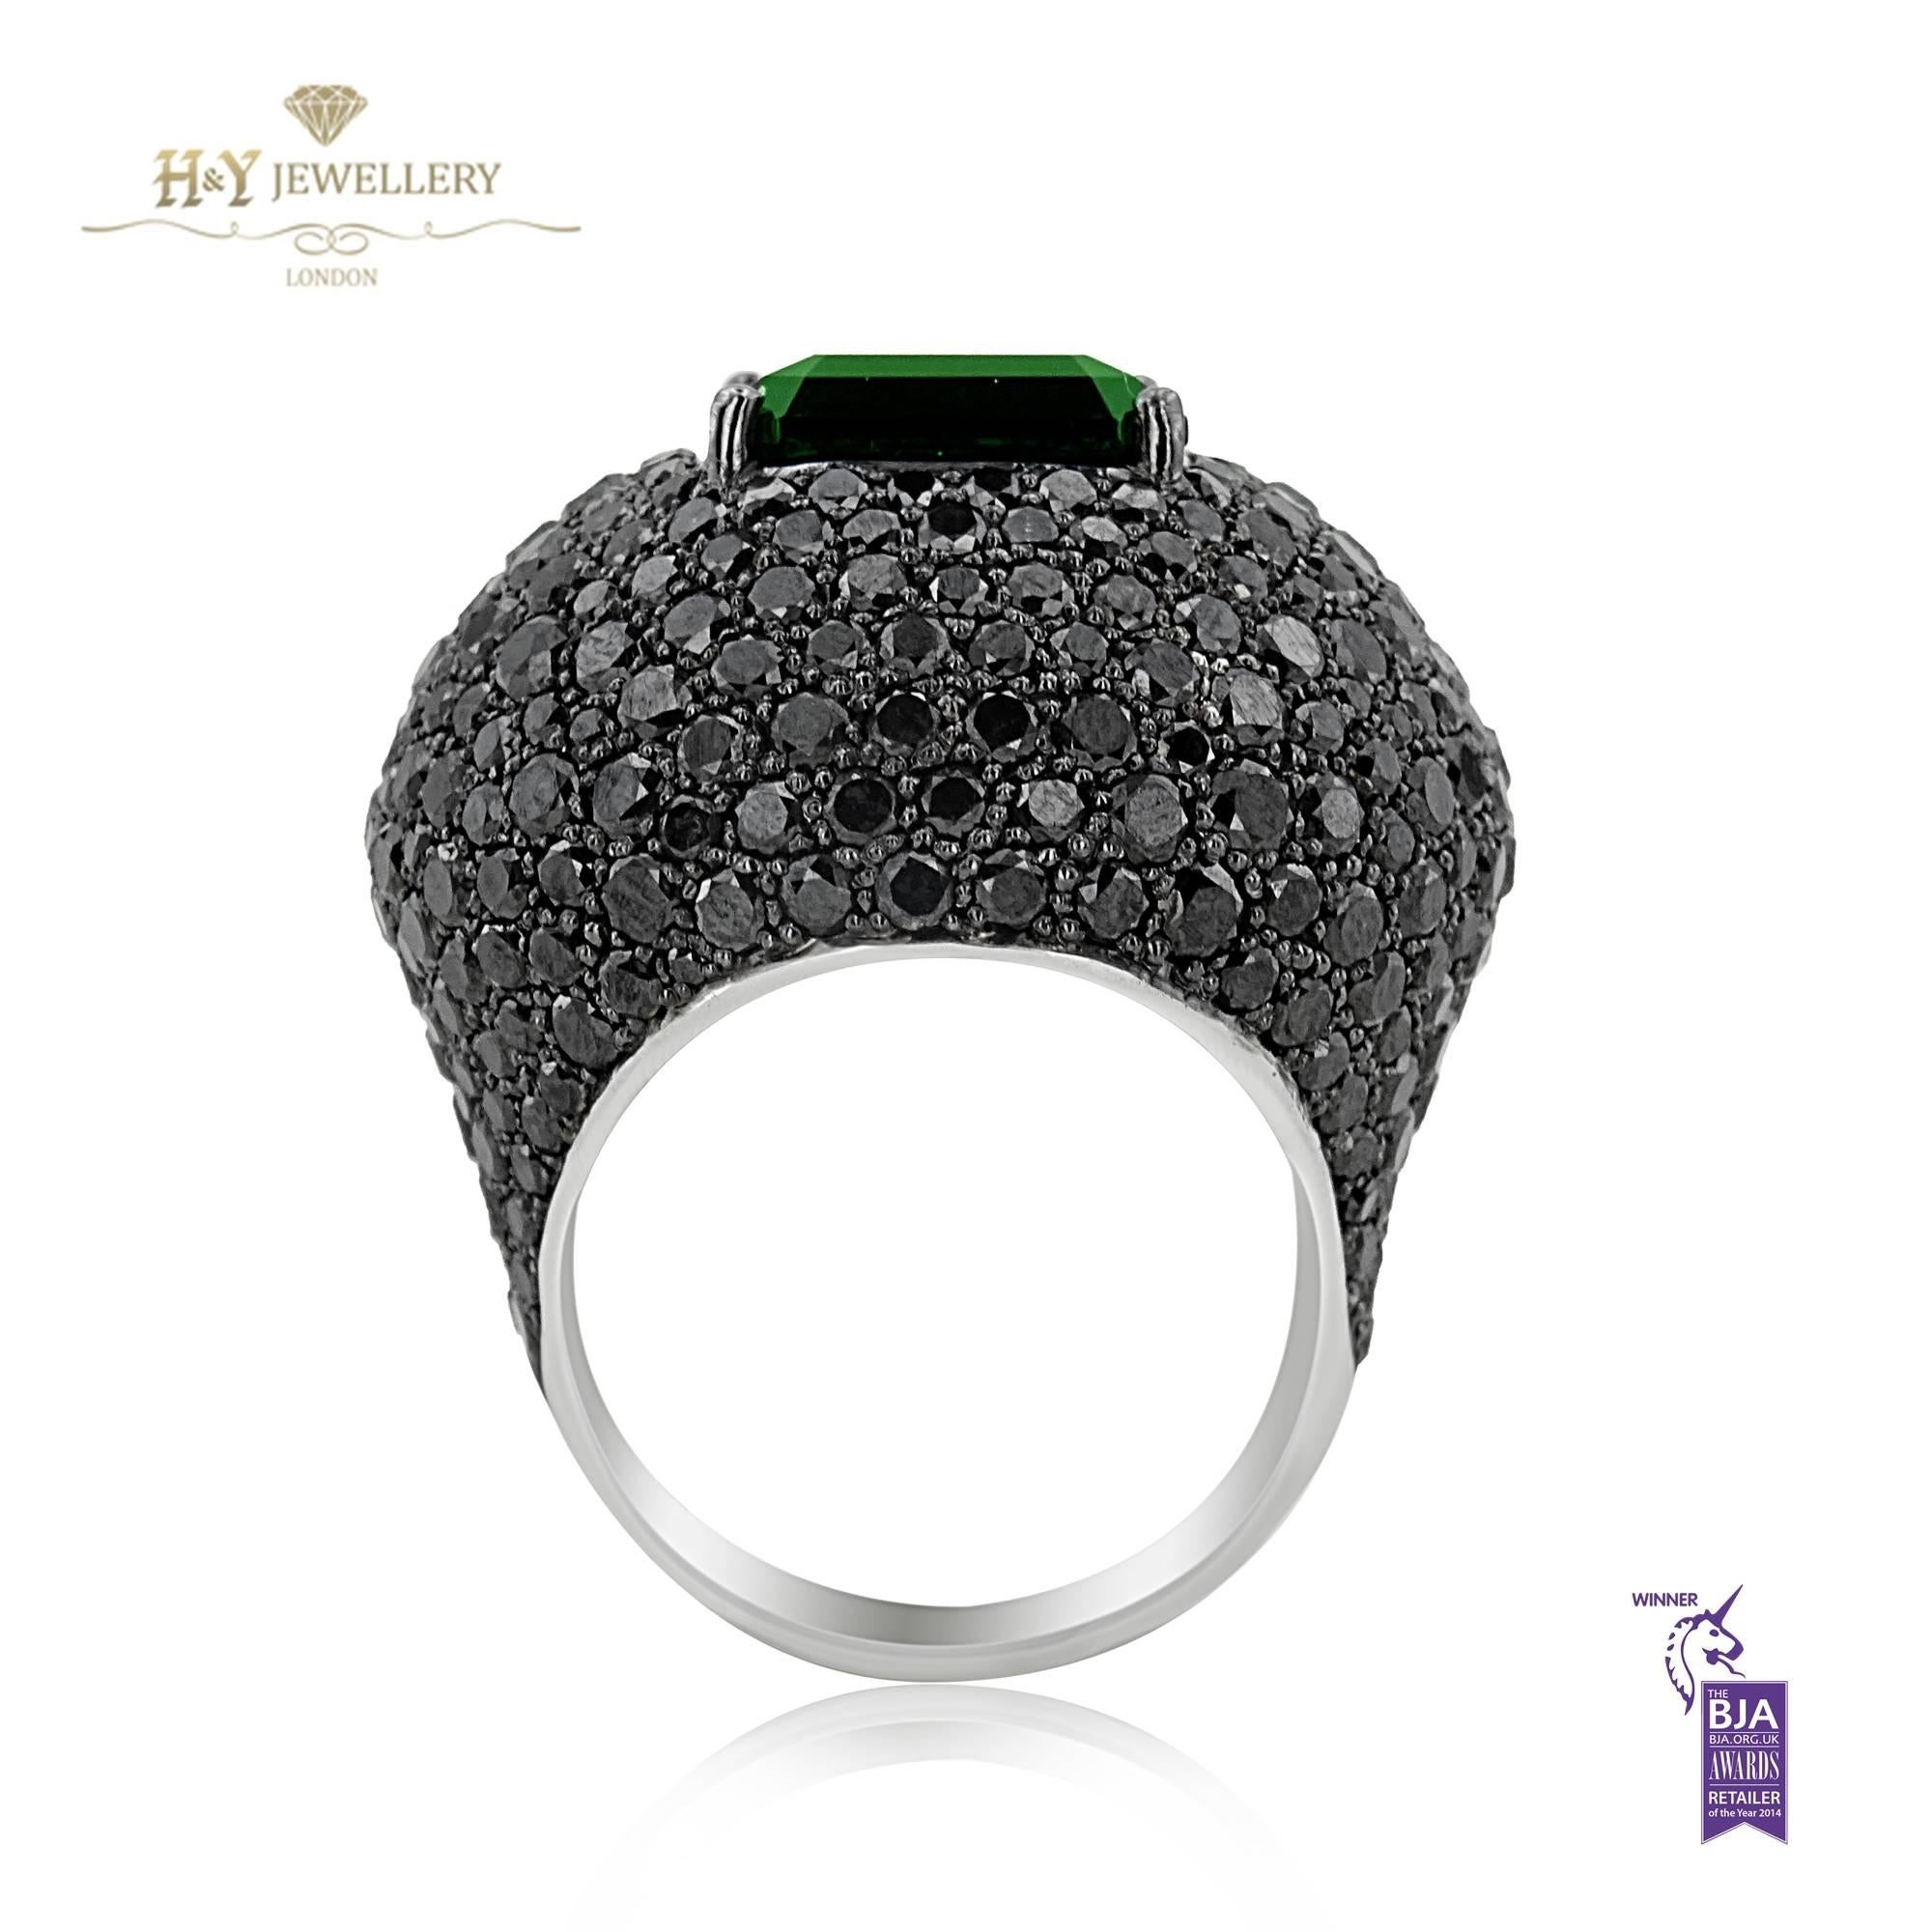 WHITE GOLD BLACK DIAMONDS AND GREEN TOURMALINE RING - 10.70 CT

Set in 18K White gold


Total crome tourmaline weight: 6.00 ct


Total black diamond weight: 4.70 ct


Total ring weight: 18.54 grams